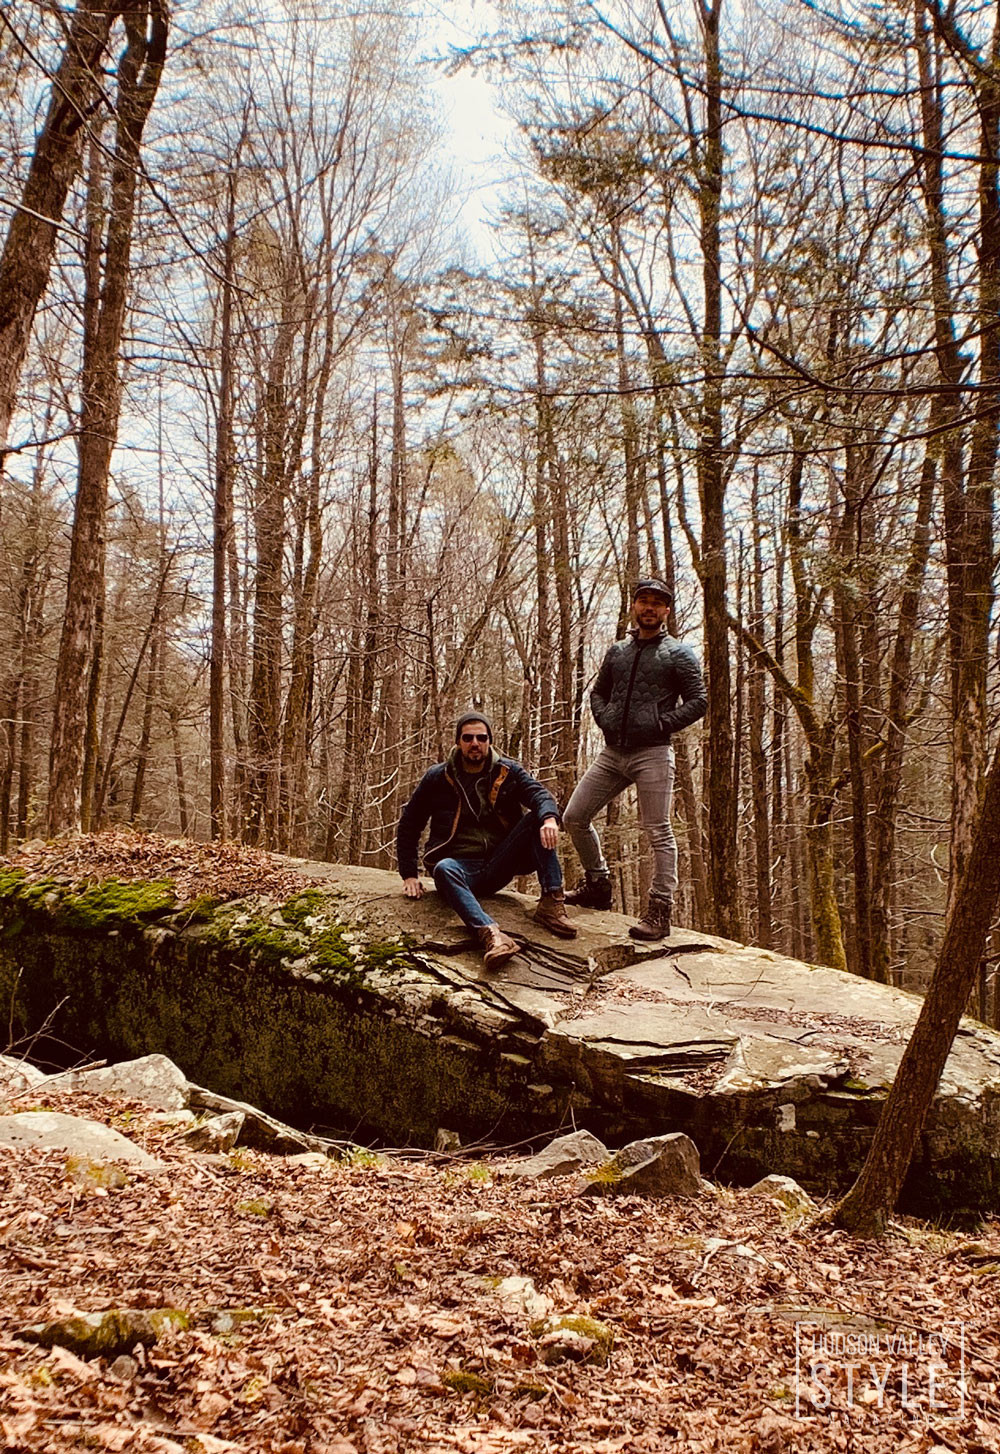 Hudson Valley Style Magazine - Exploring Hudson Valley Hiking Trails with Max & Dino